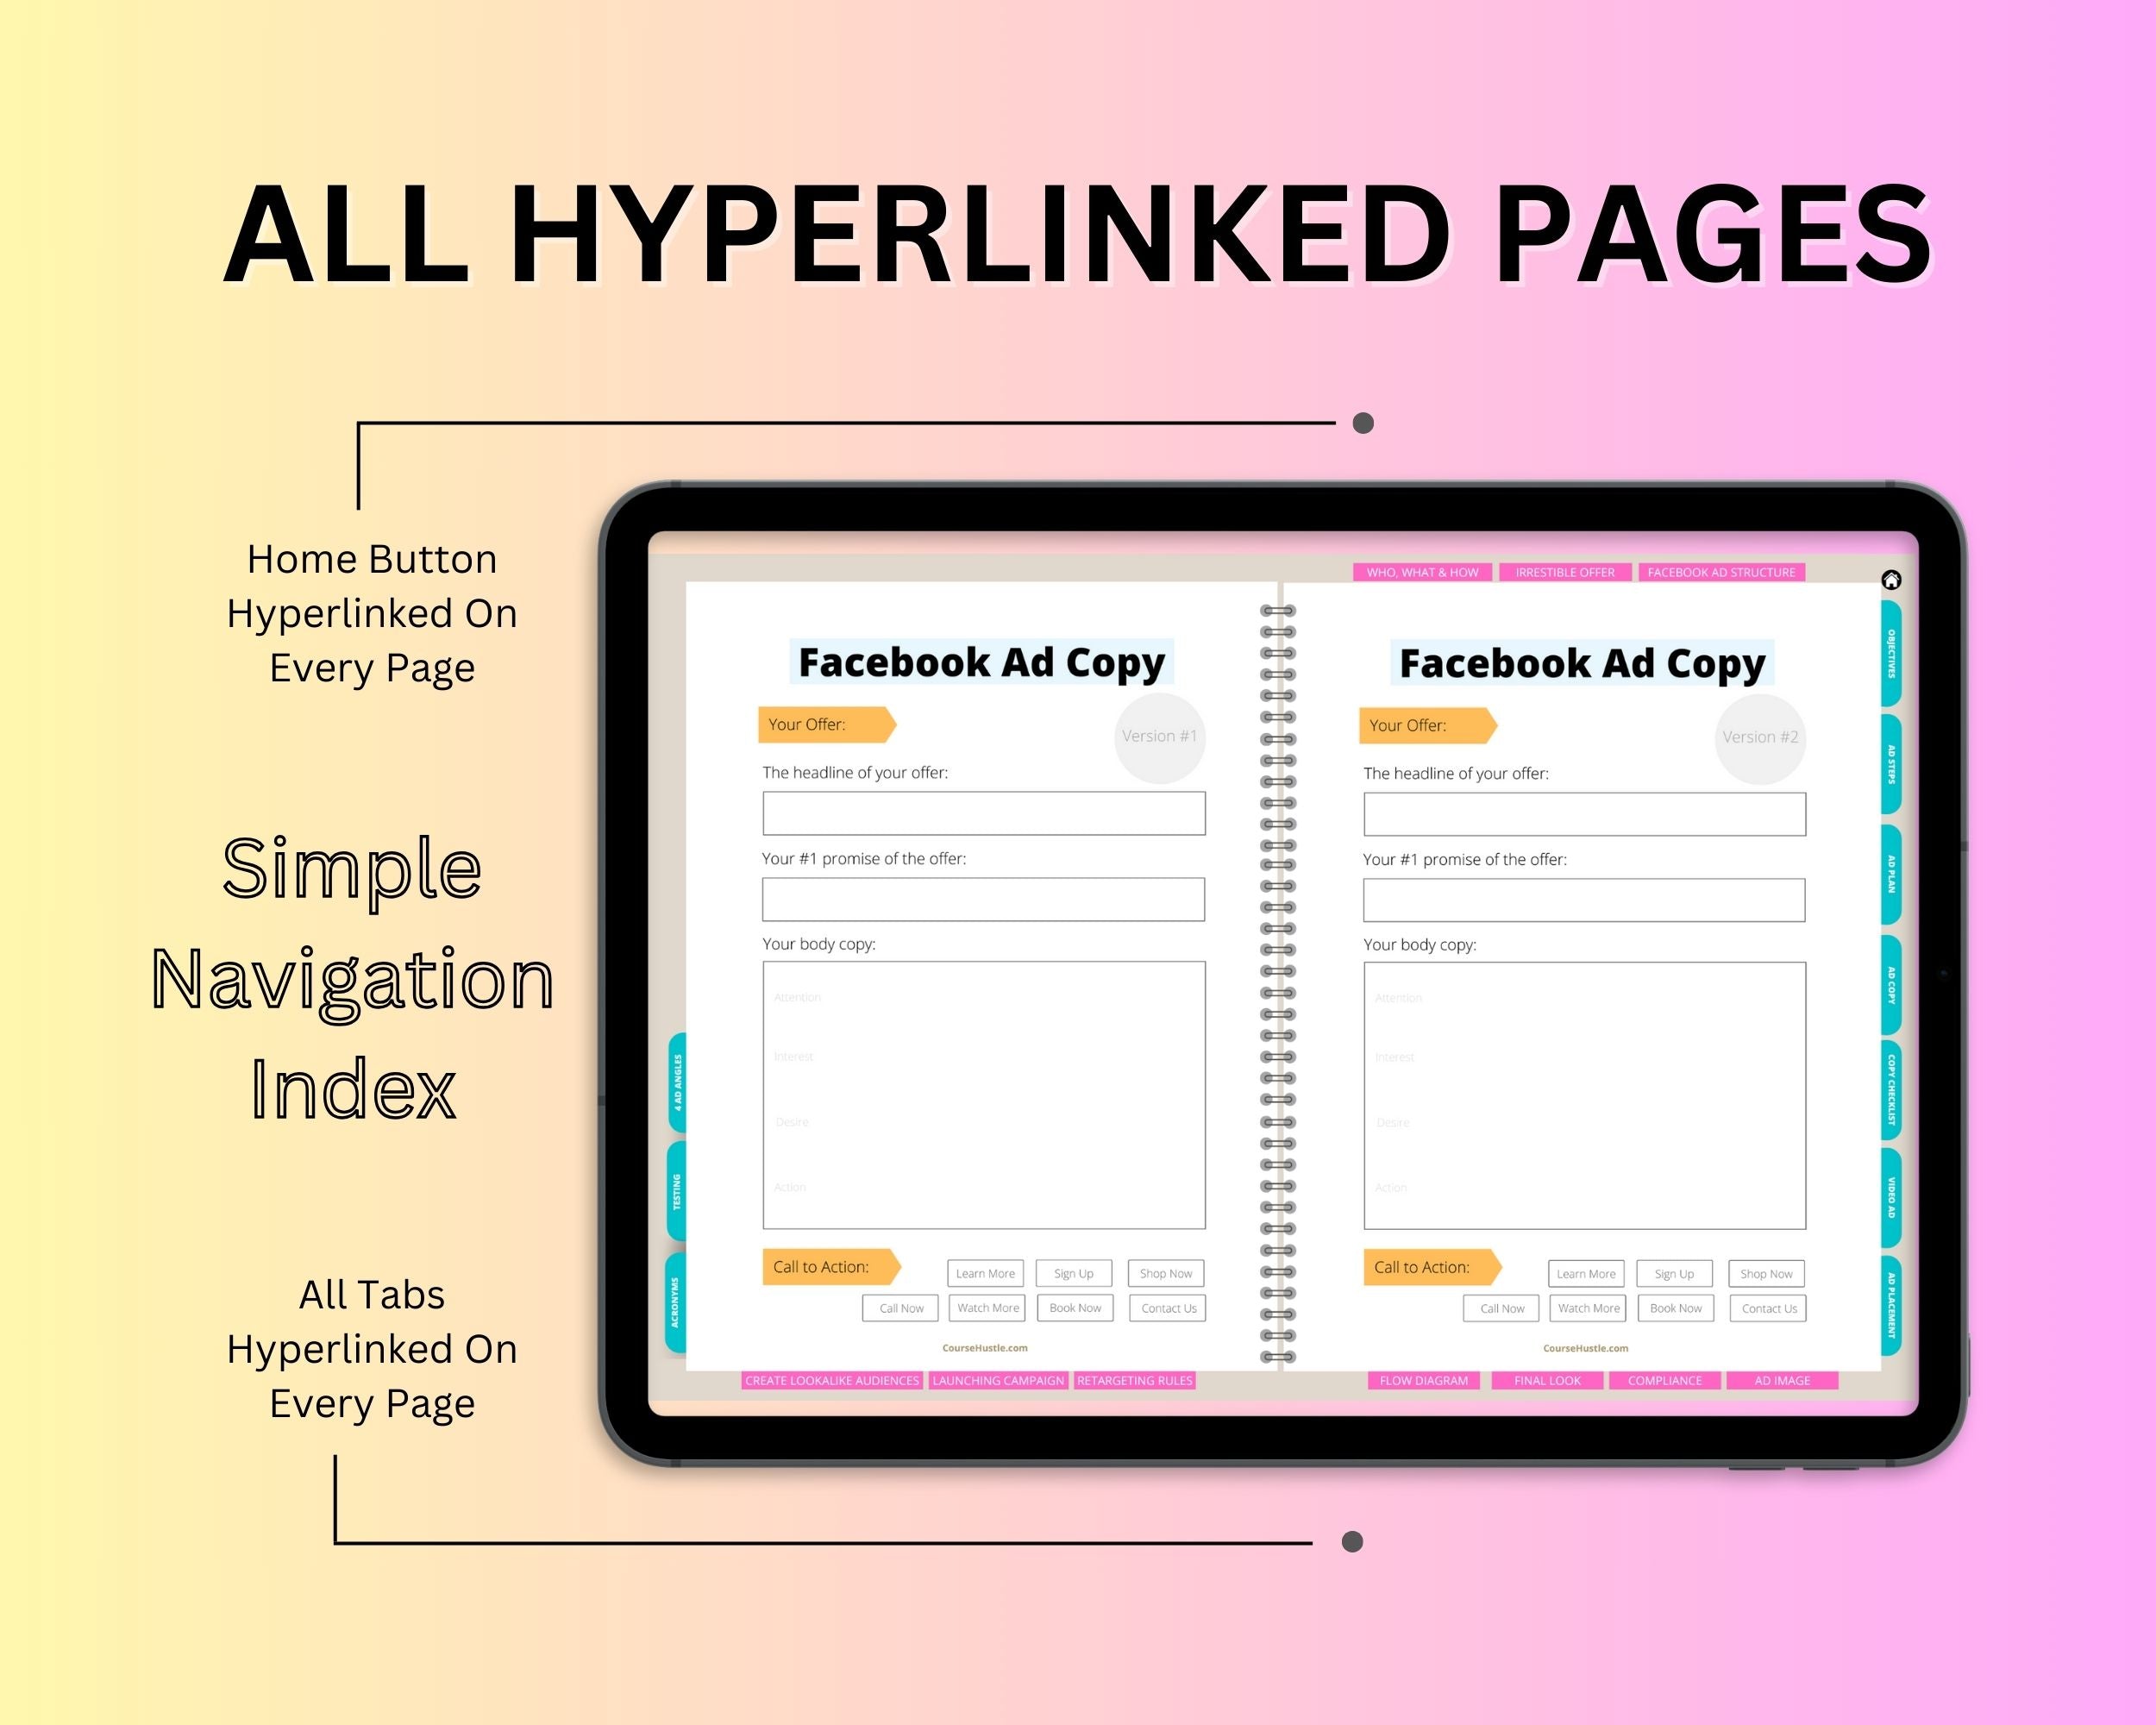 Facebook Ad Digital Workbook | Hyperlinked PDF | Suitable with Goodness & Notability